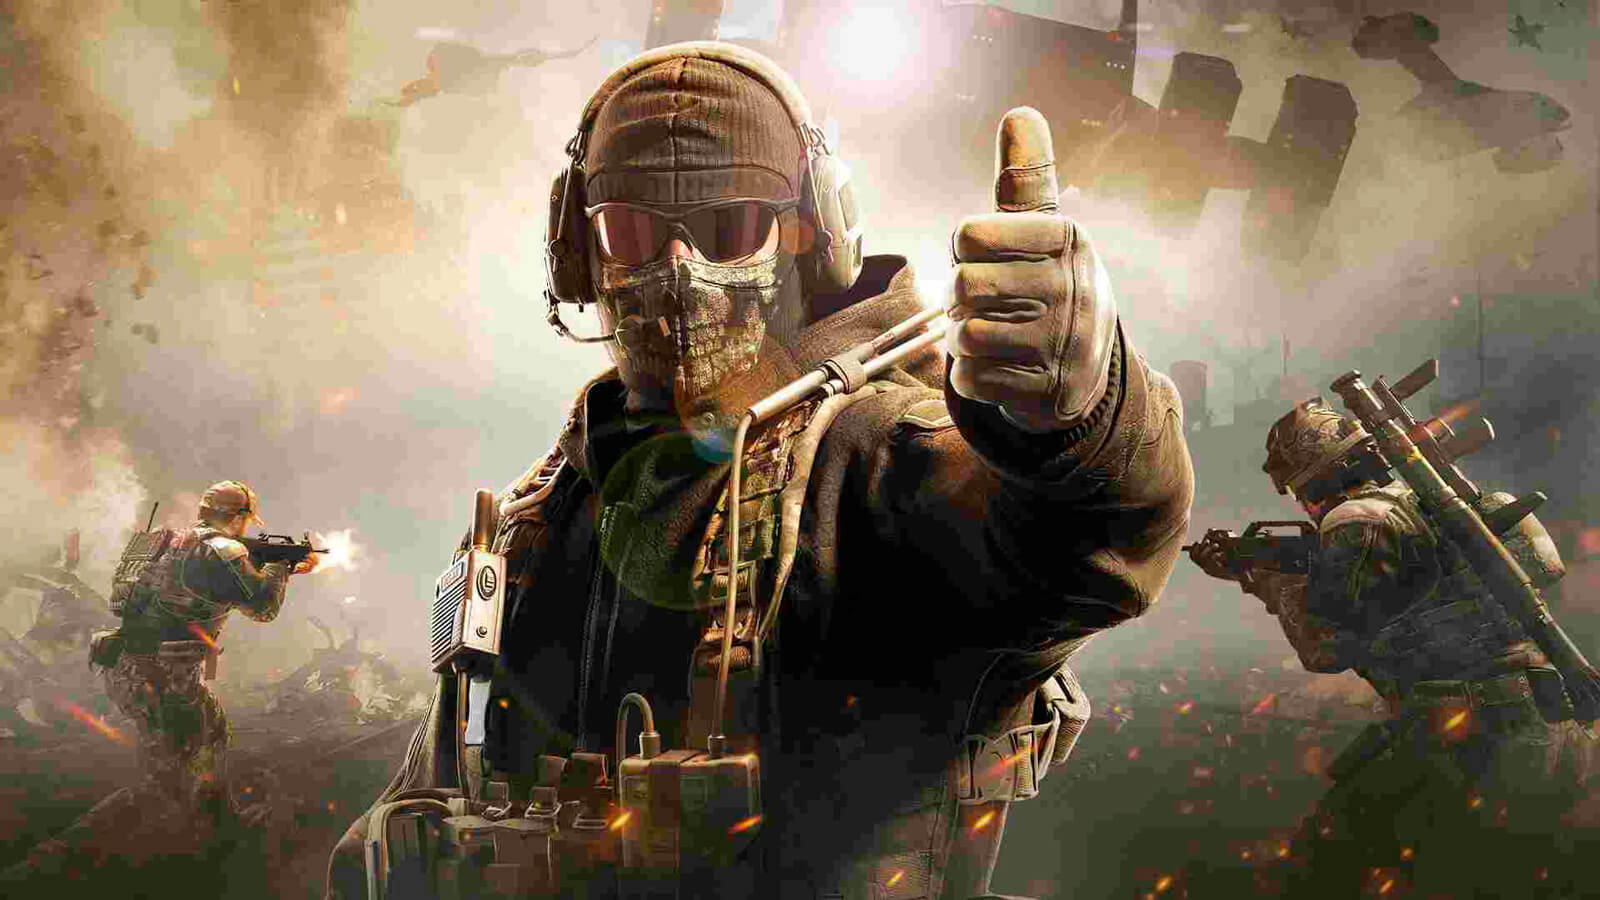 COD Mobile Redeem Codes: Here's How to Use the Codes in Call of Duty: Mobile  - PlayerZon Blog